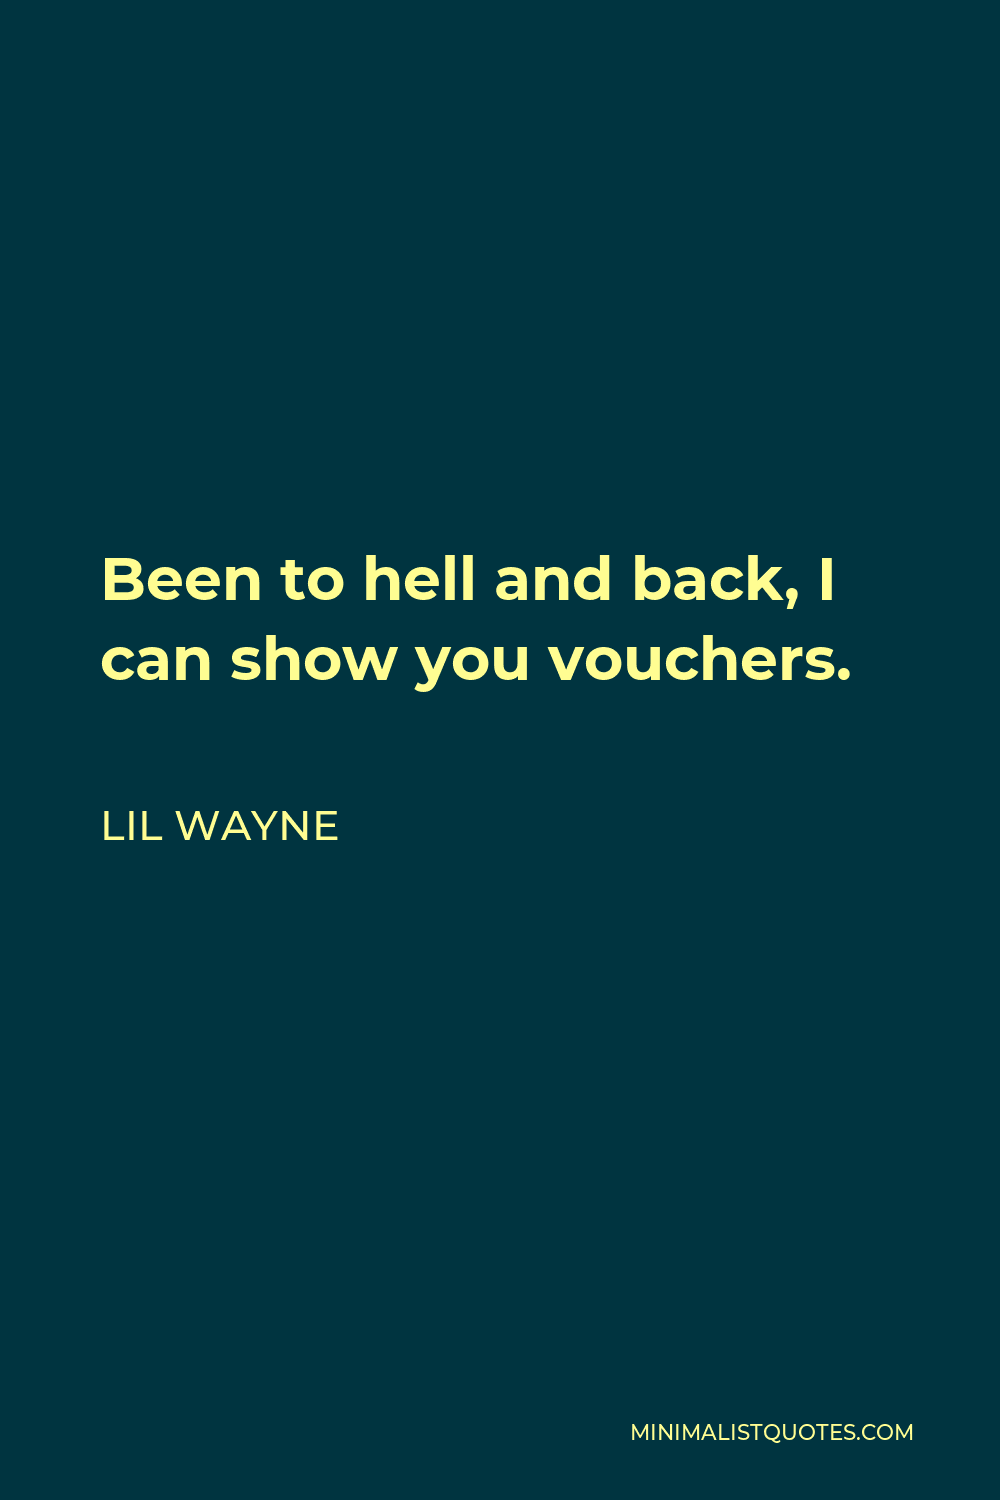 Lil Wayne Quote - Been to hell and back, I can show you vouchers.